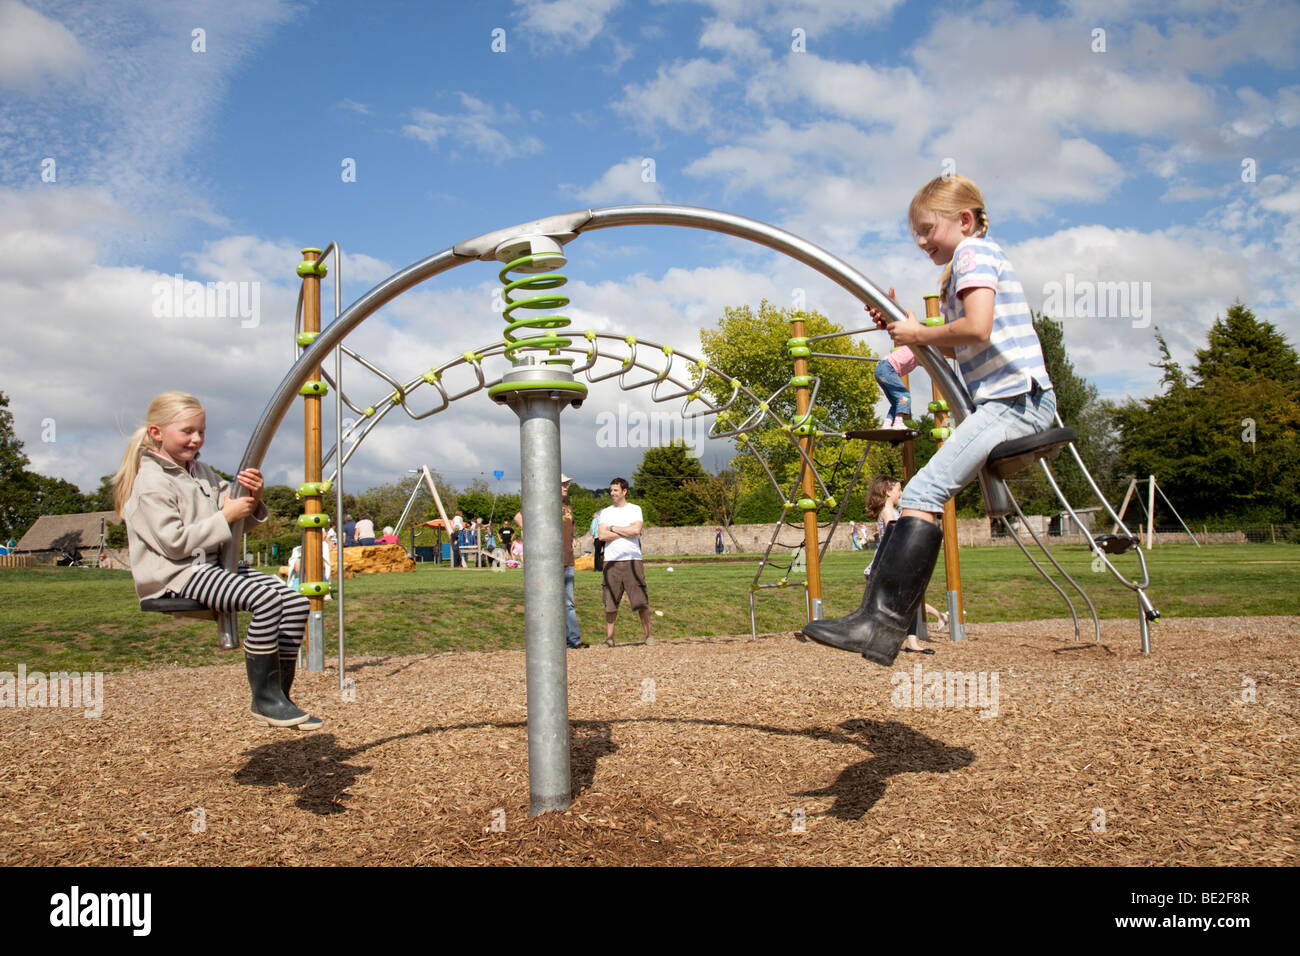 Two girls enjoying hitech seesaw at new exciting playground Broadway Activity Park Worcestershire UK Stock Photo